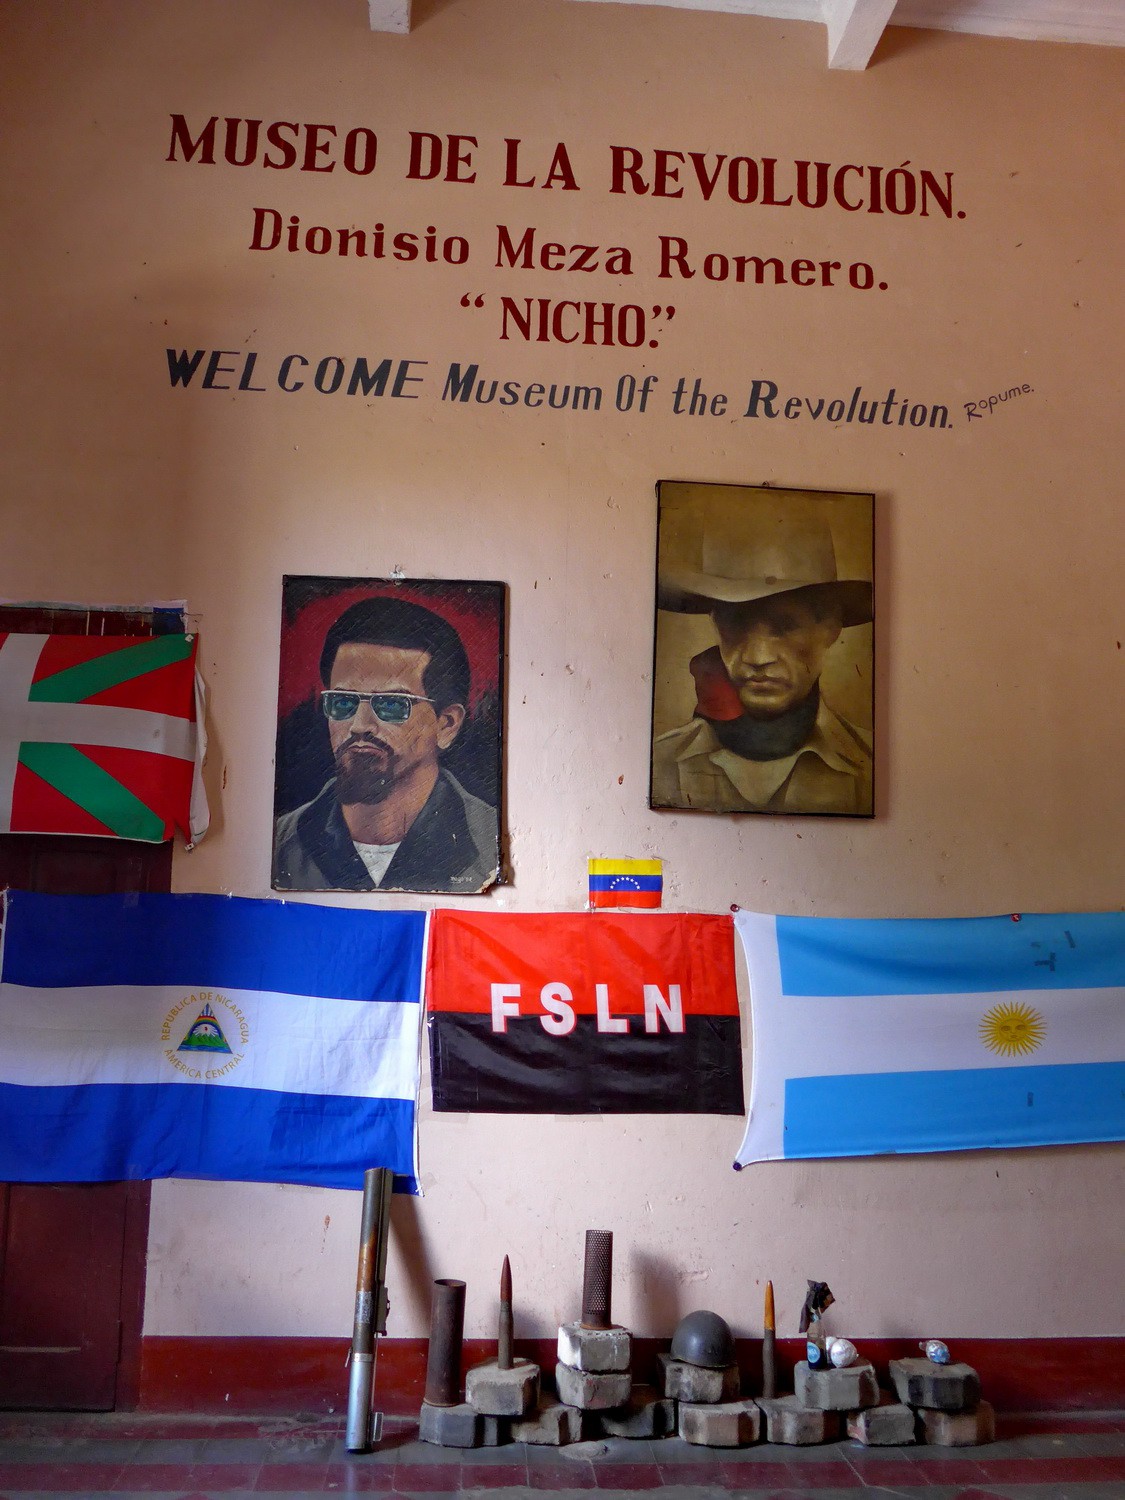 In the museum of the revolution